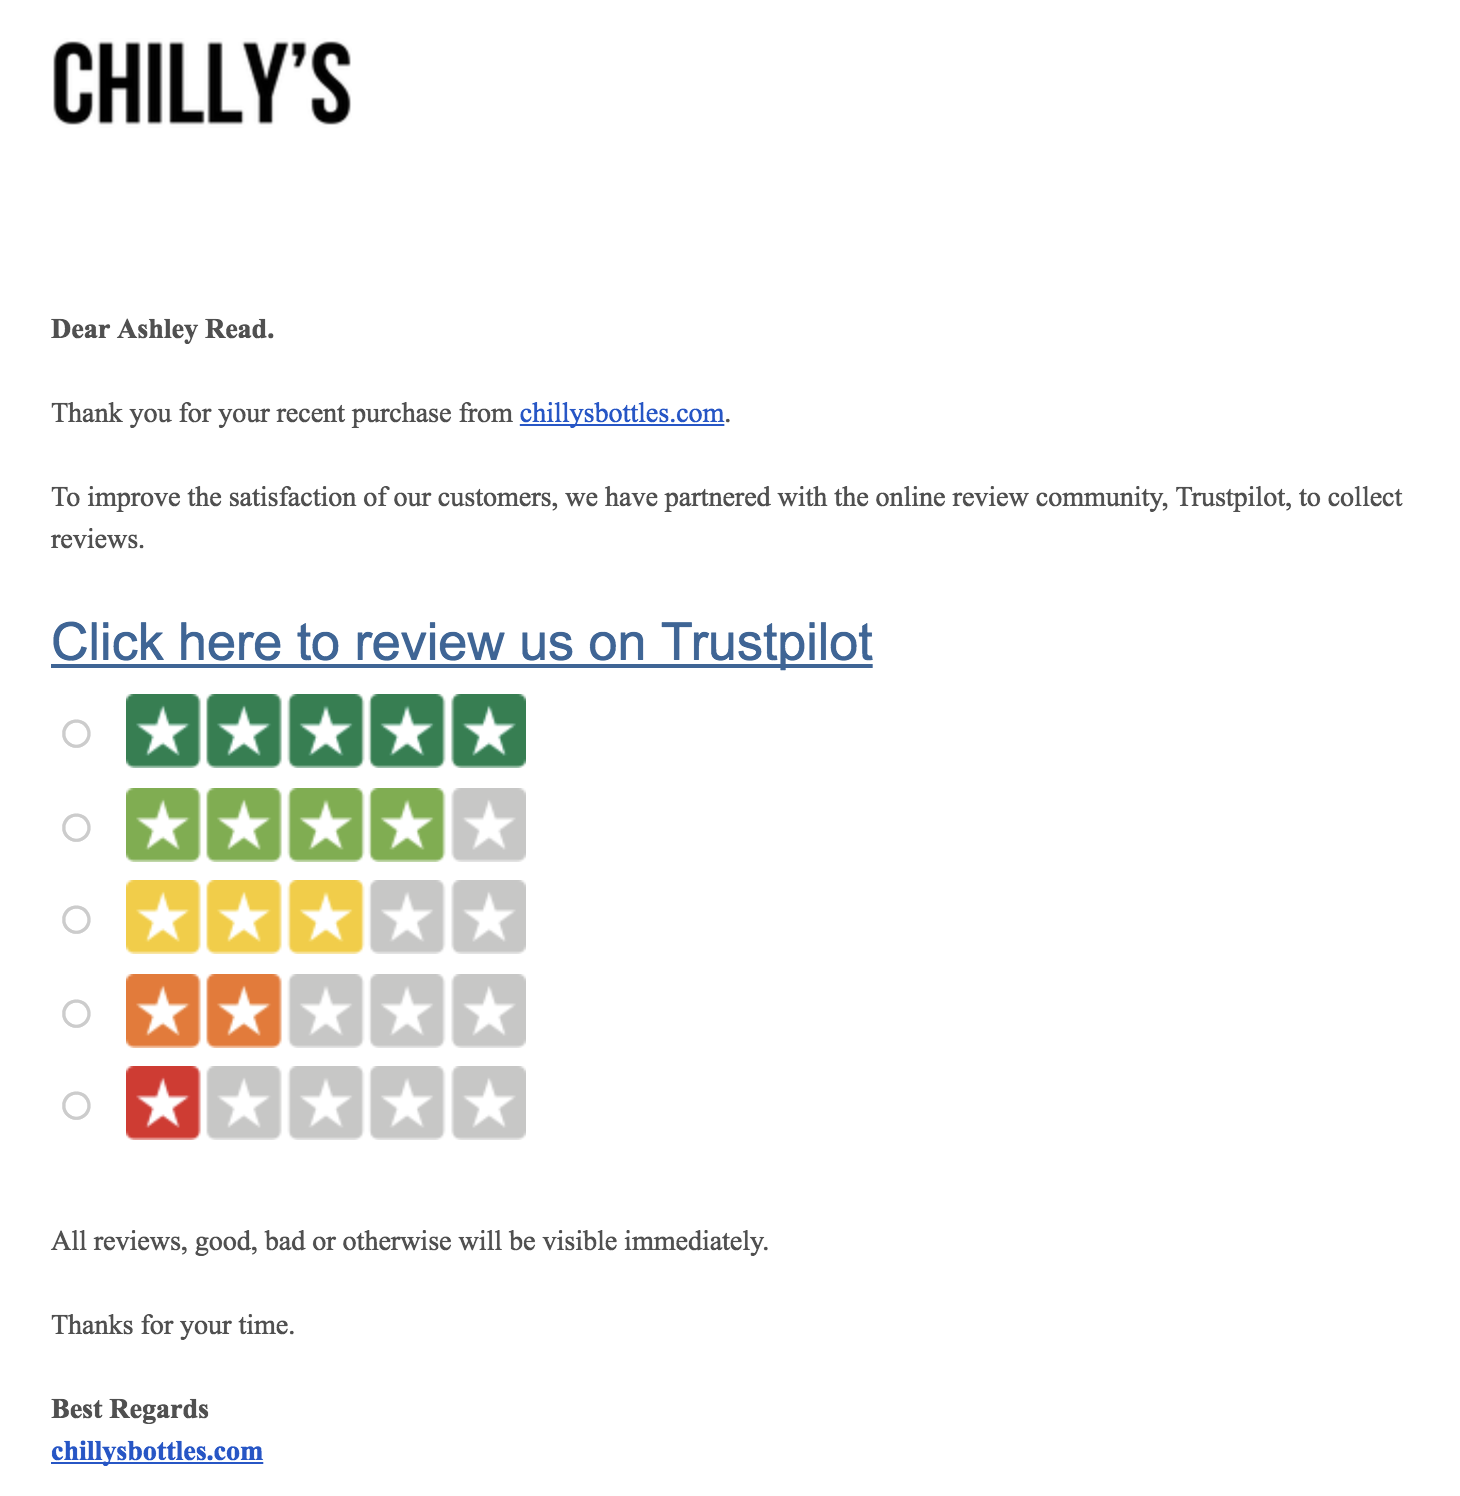 Screenshot showing a review page by Chilly